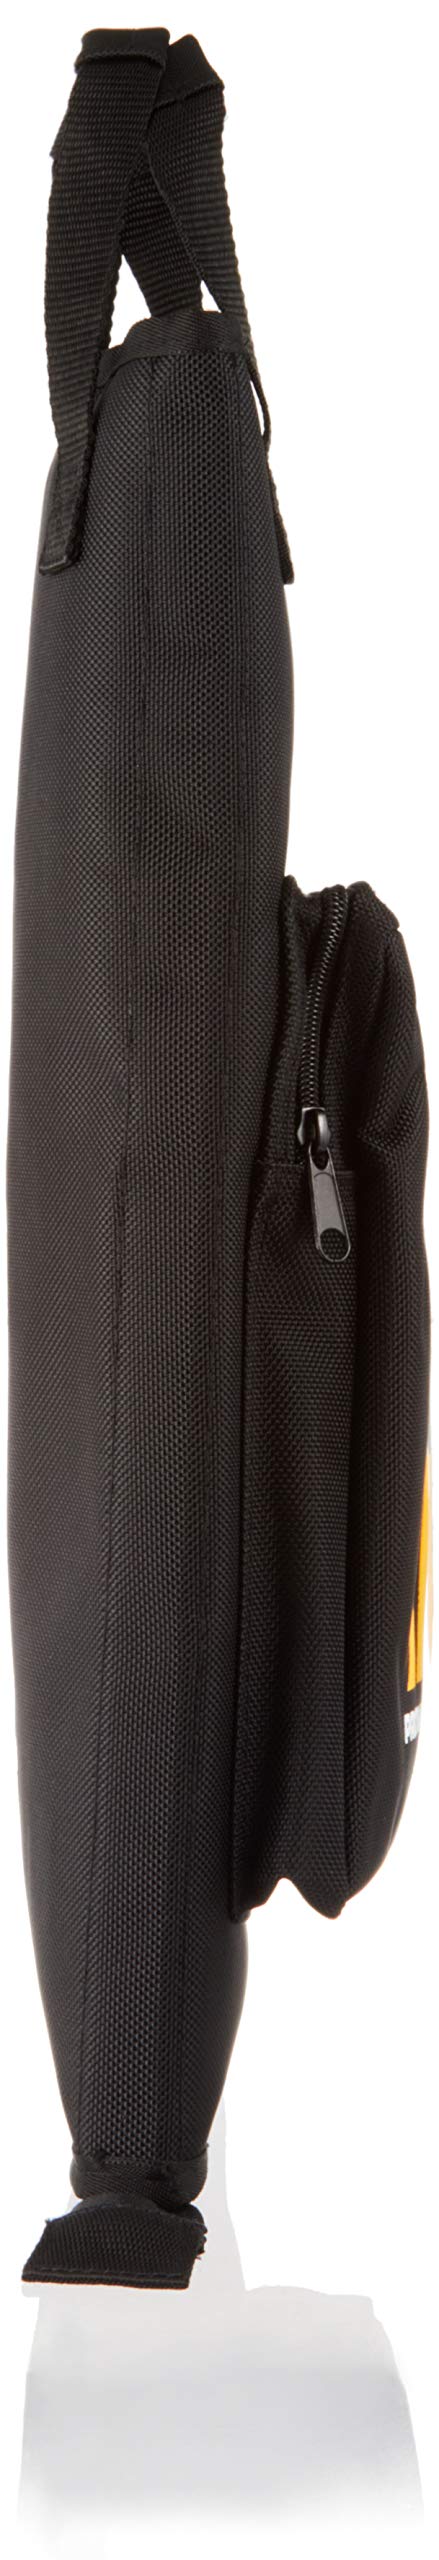 Promark Every Day Stick Drumstick Bag Everyday